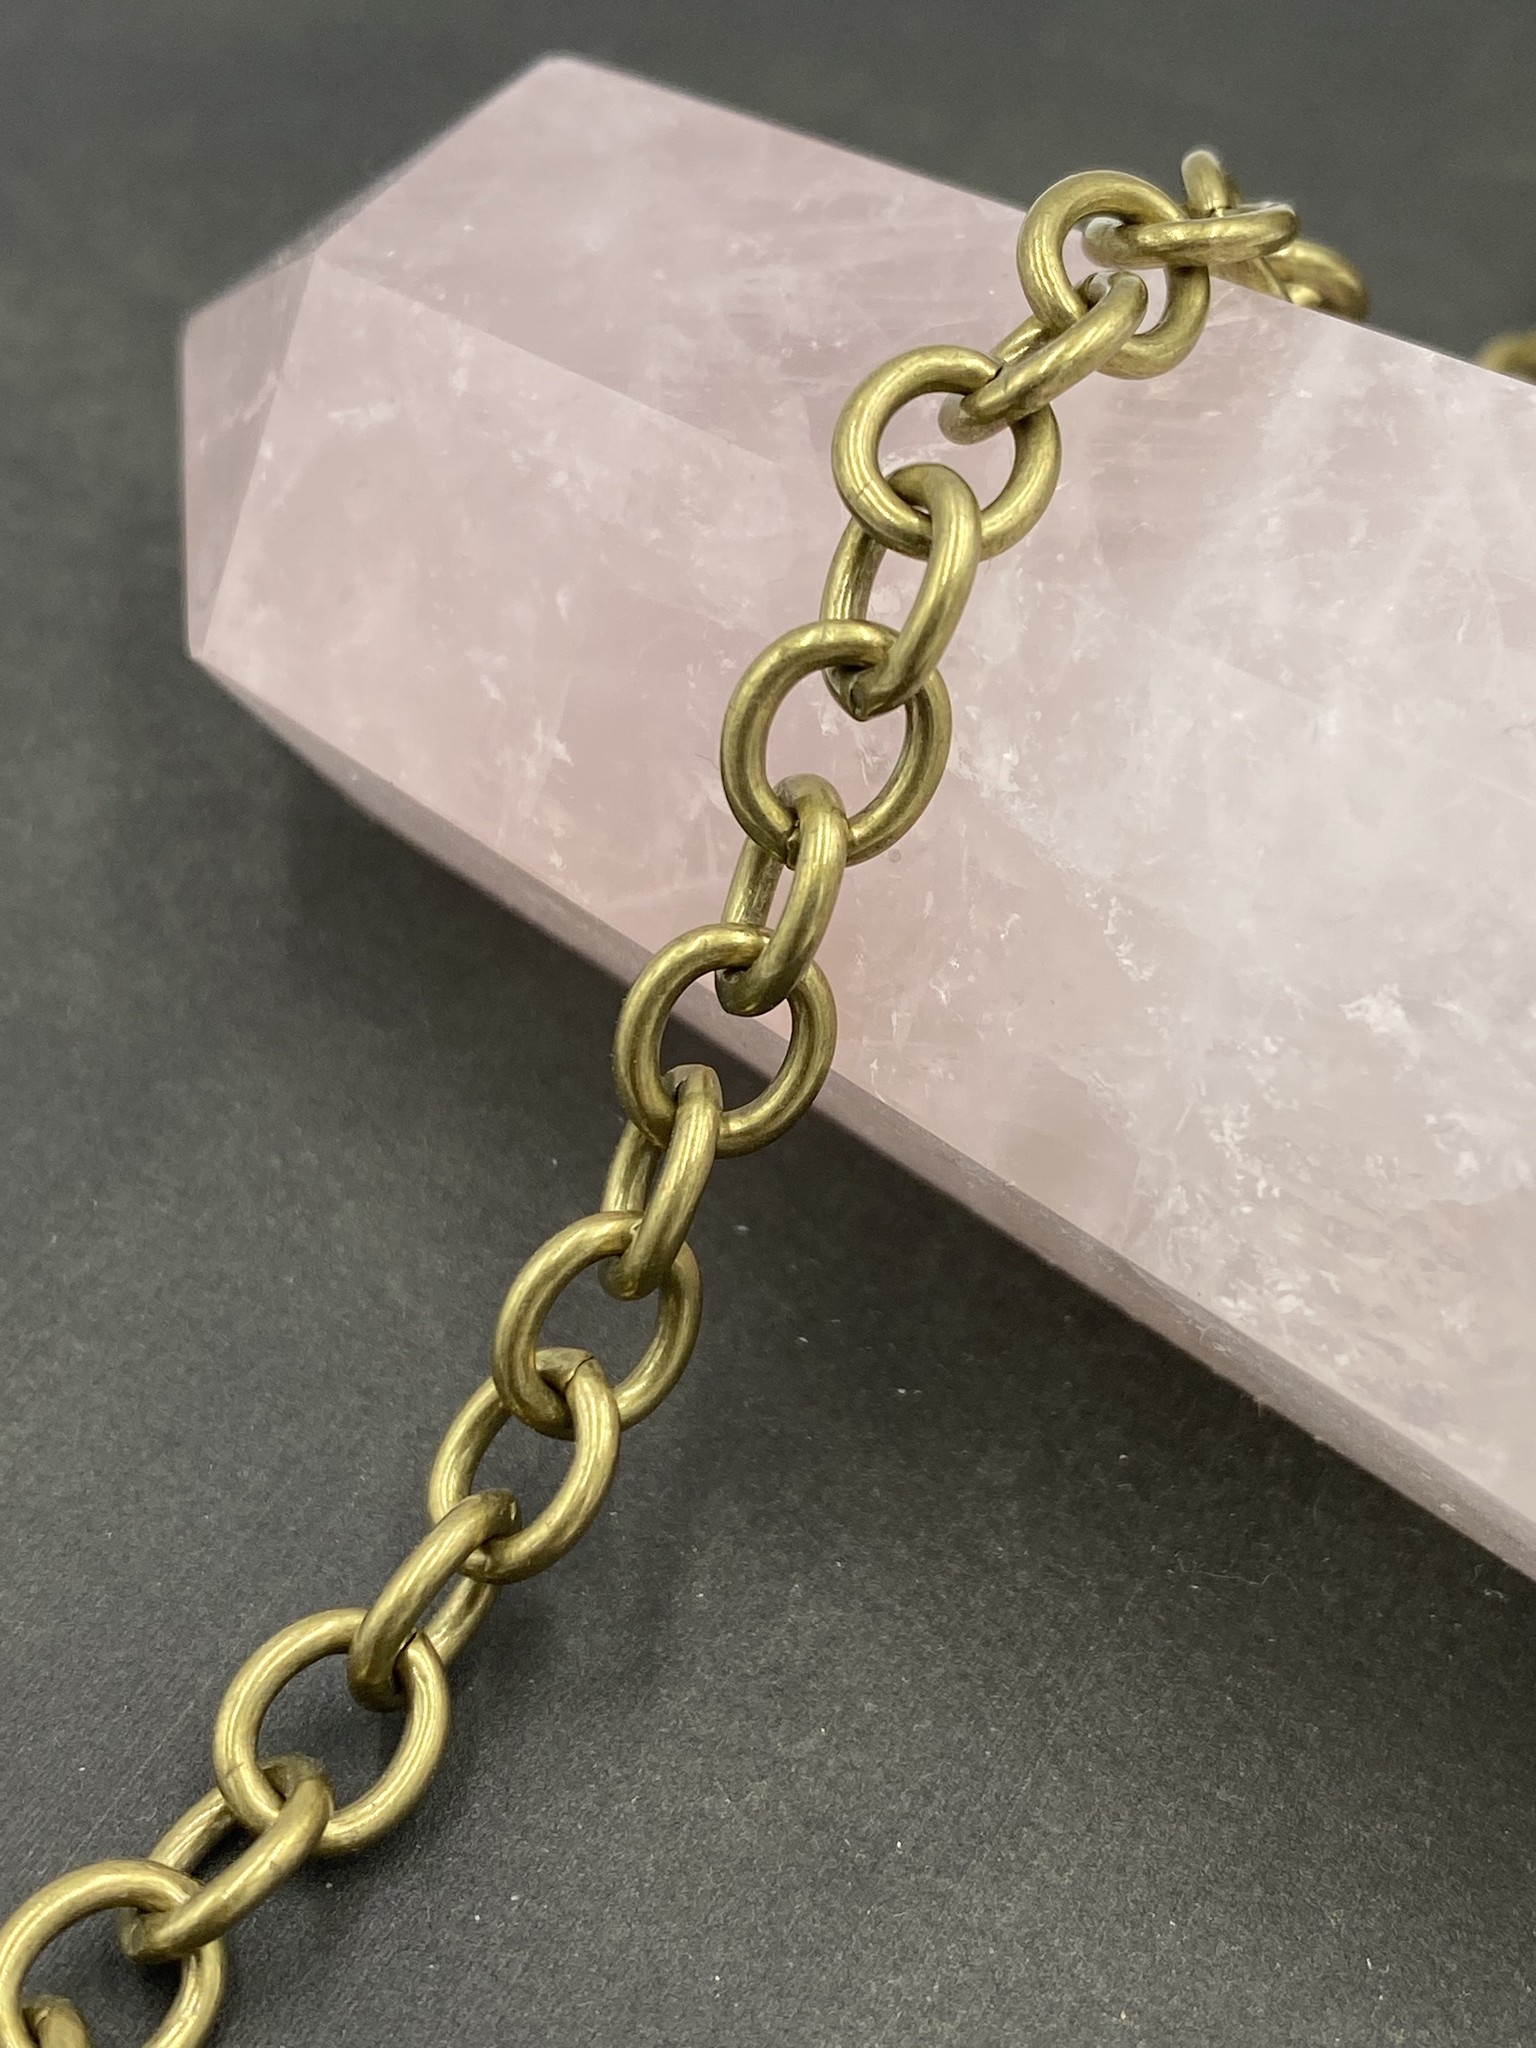 8mm x 6.5mm Heavy Cable Chain- Antique Brass (ch183)